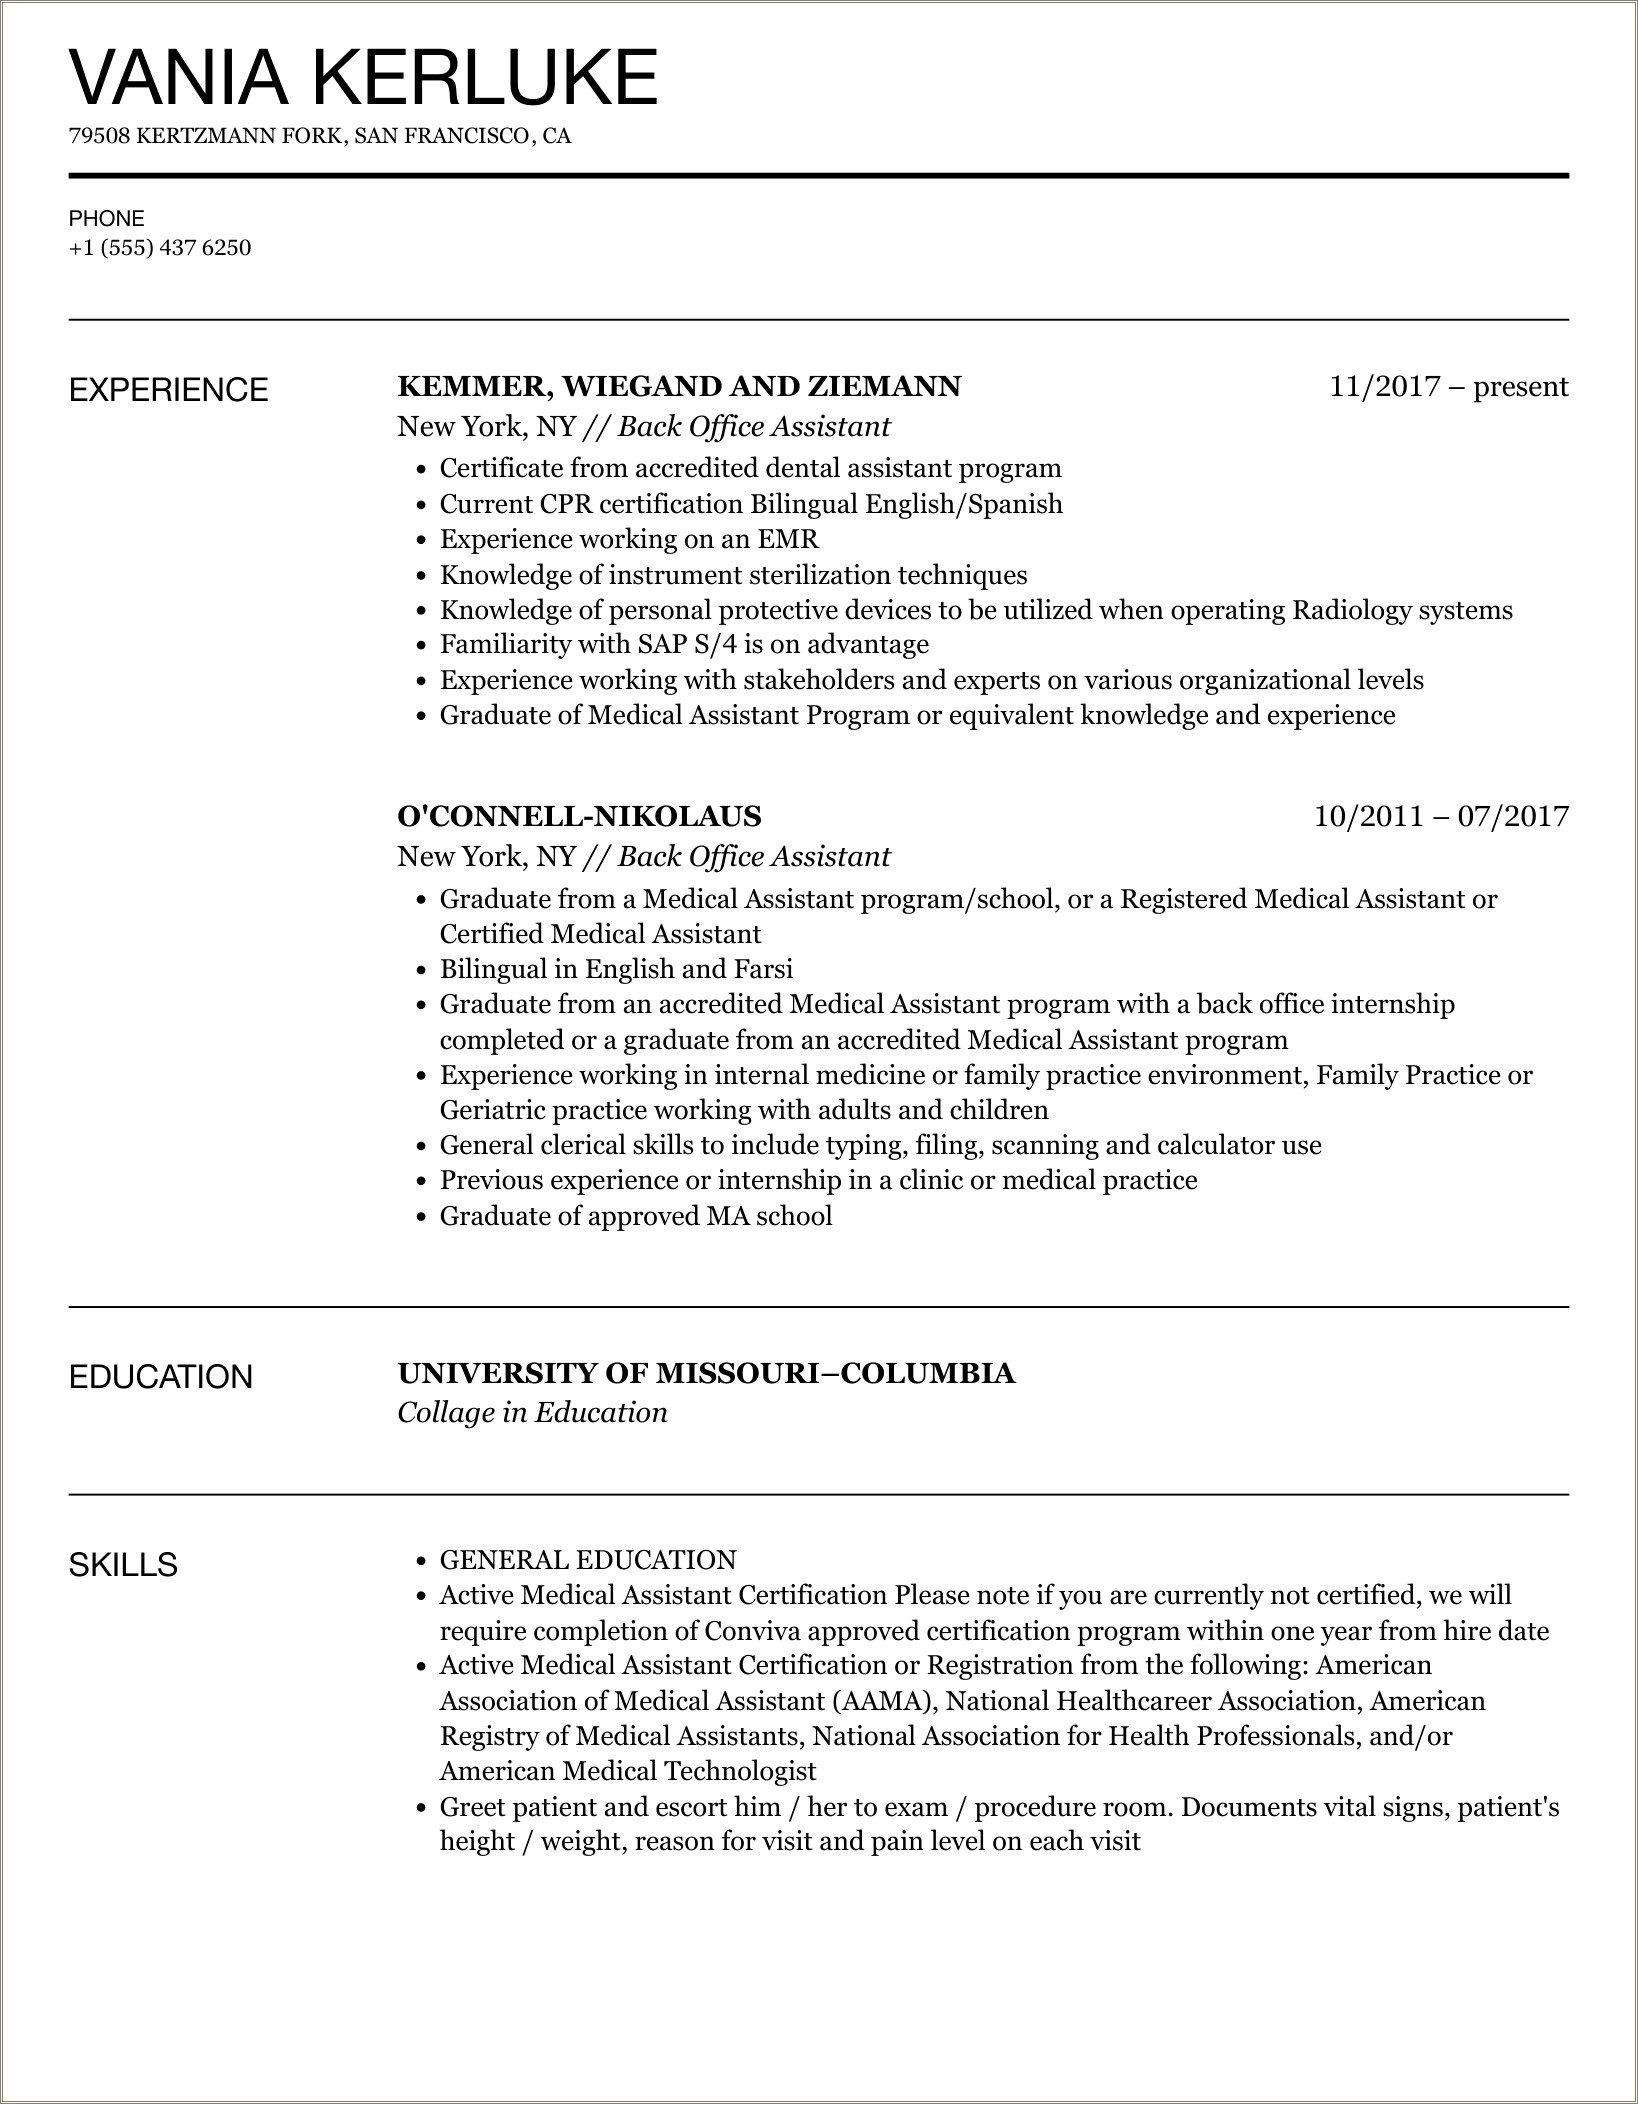 Resume For Office Assistant With Experience